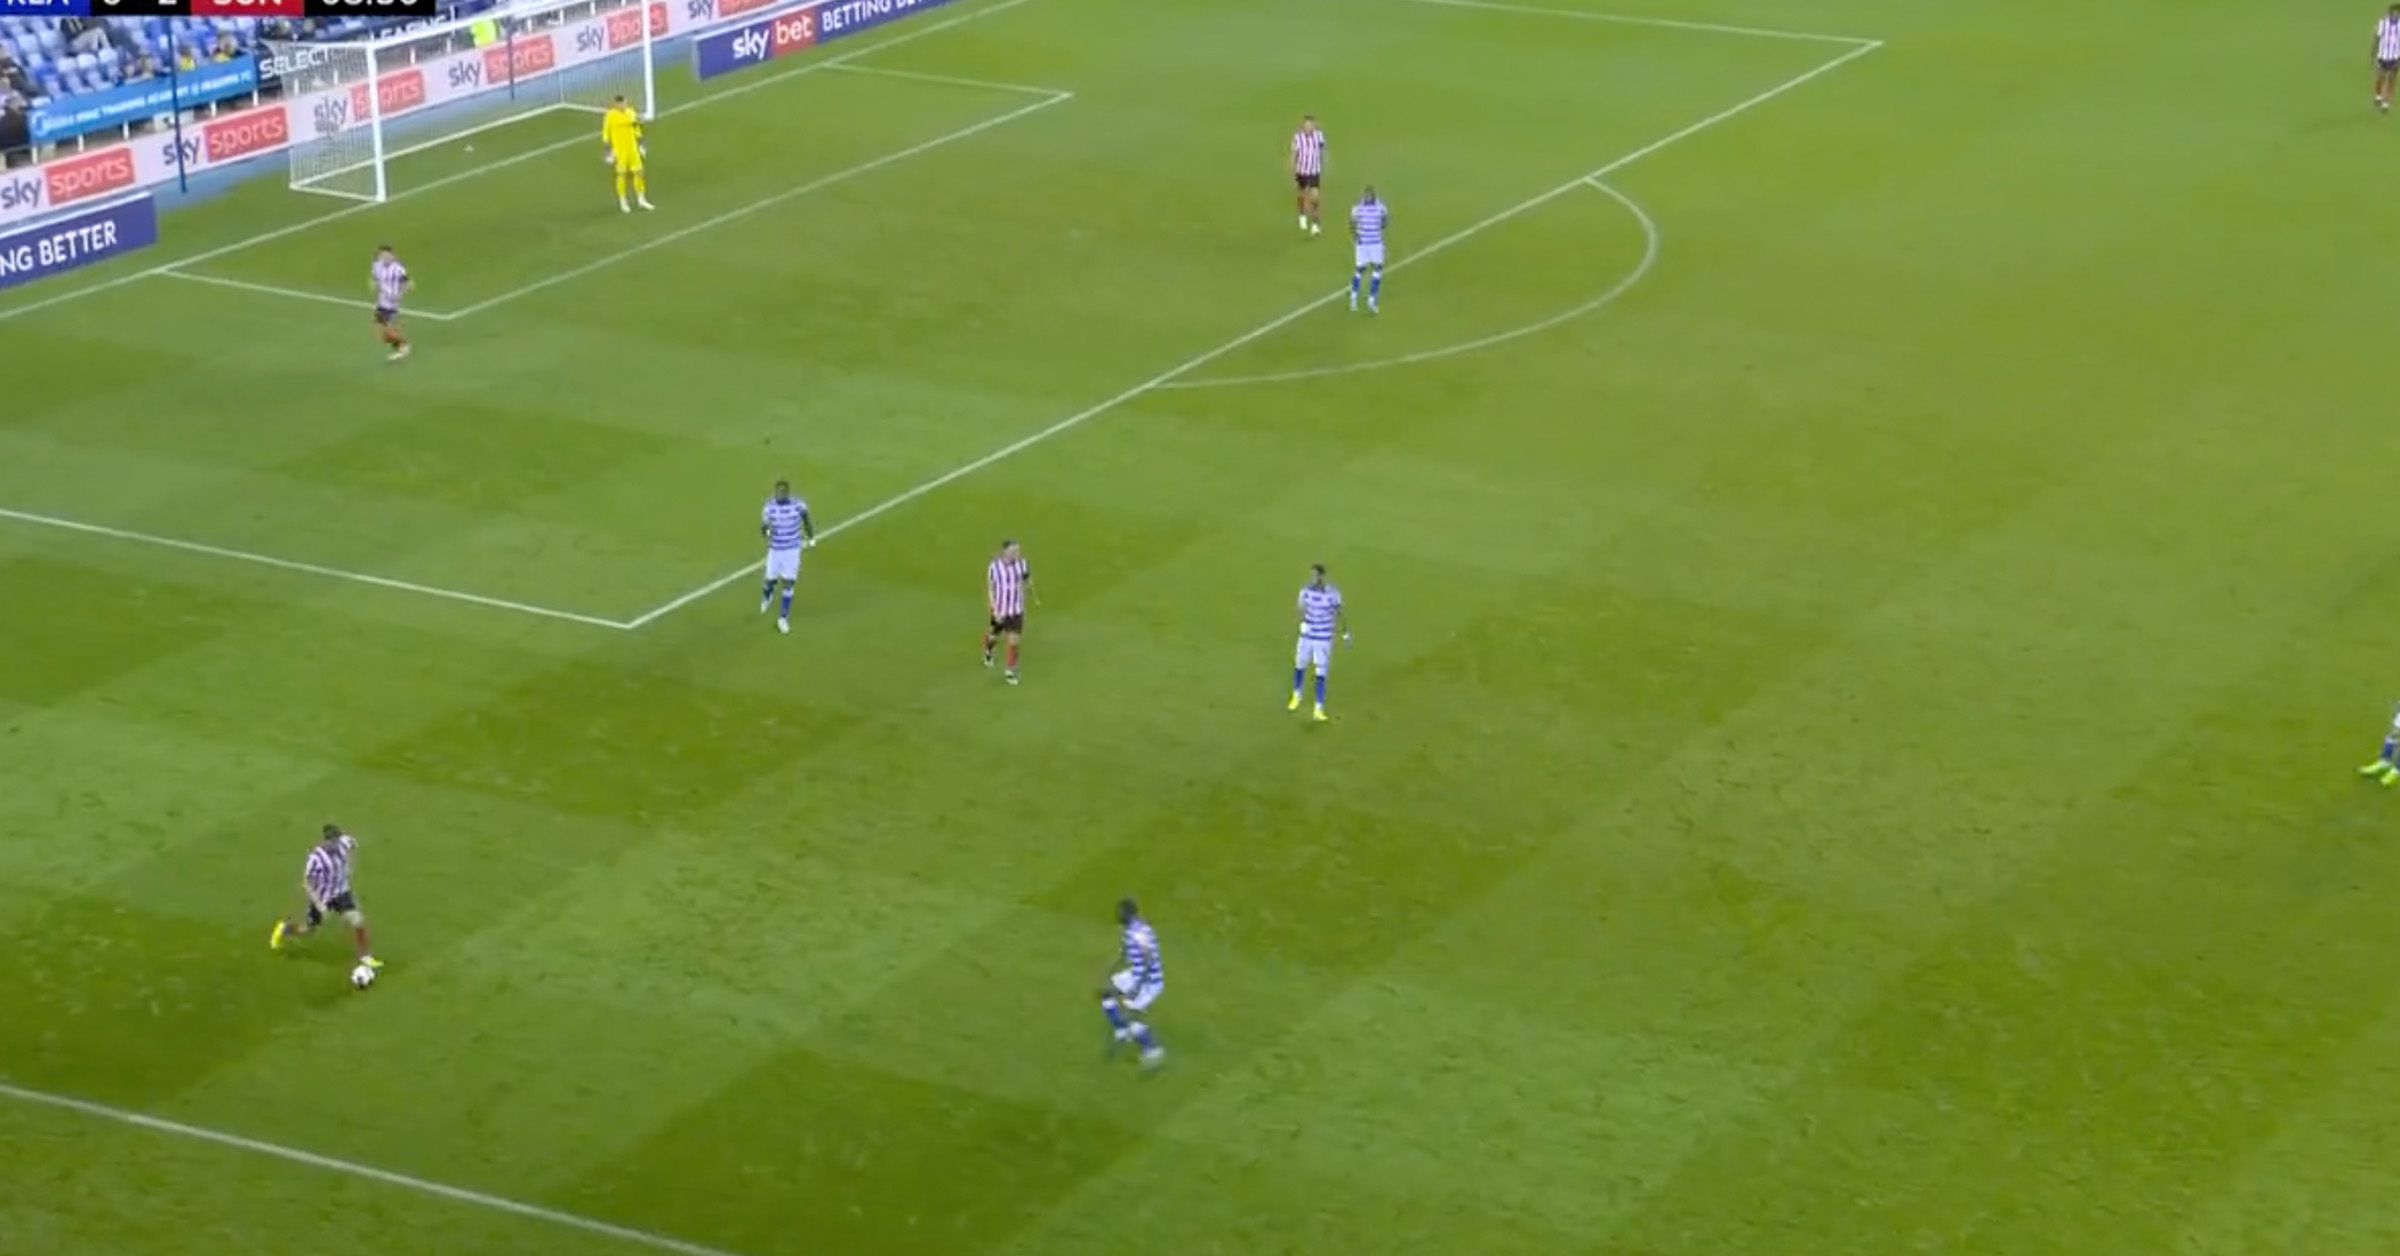 Sunderland scored one of the best team goals you will ever see